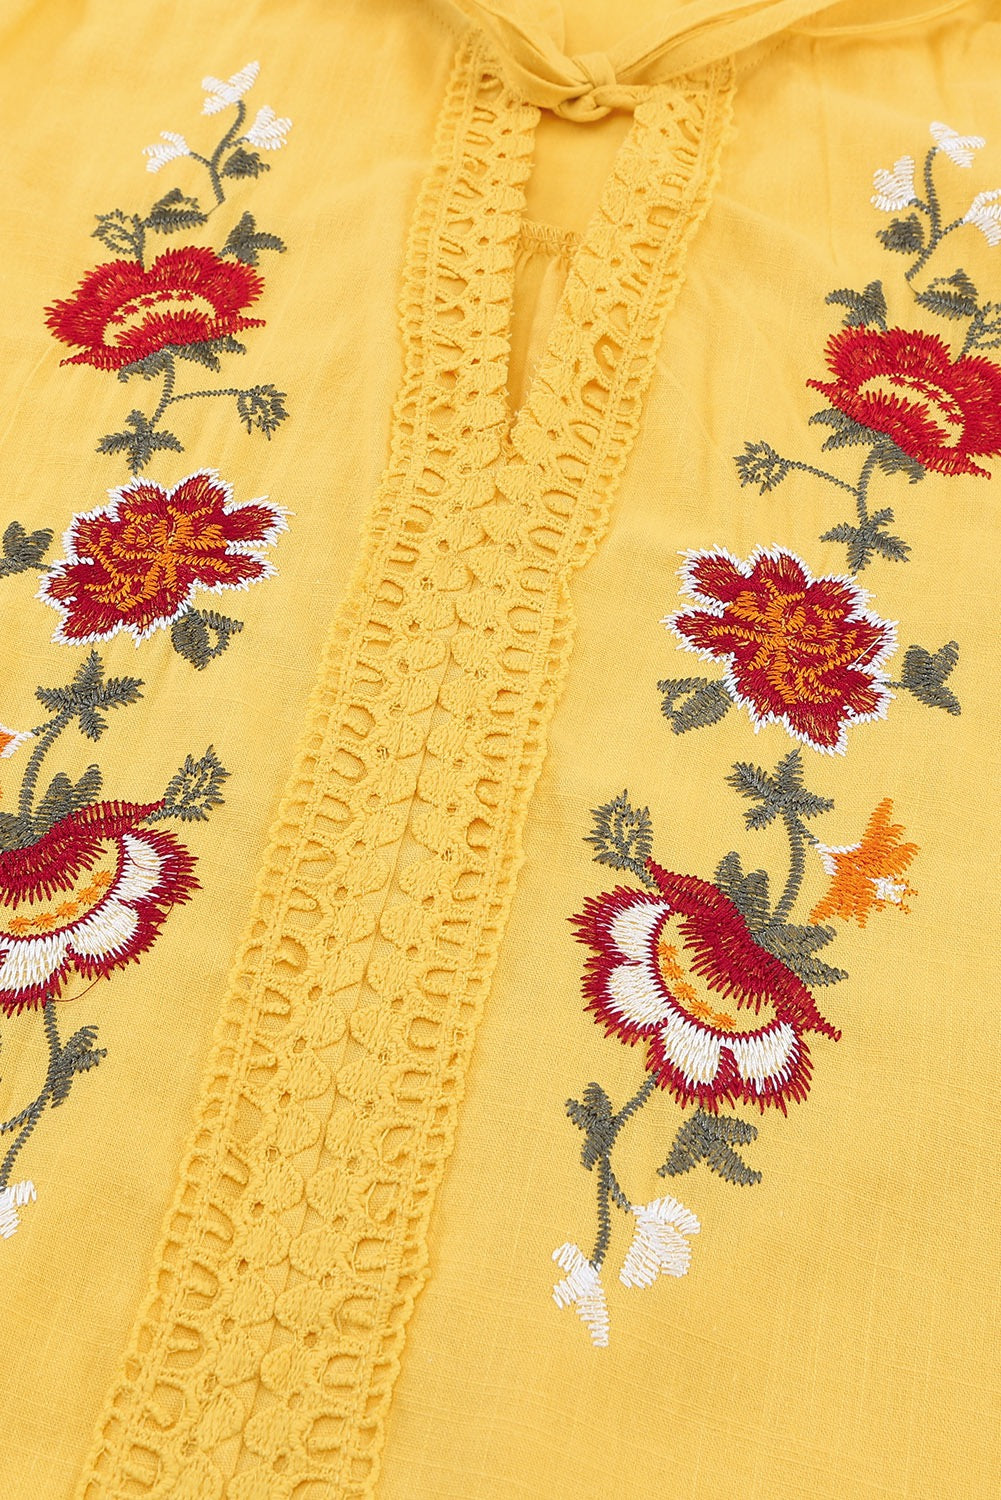 Yellow floral embroidered flutter sleeve top